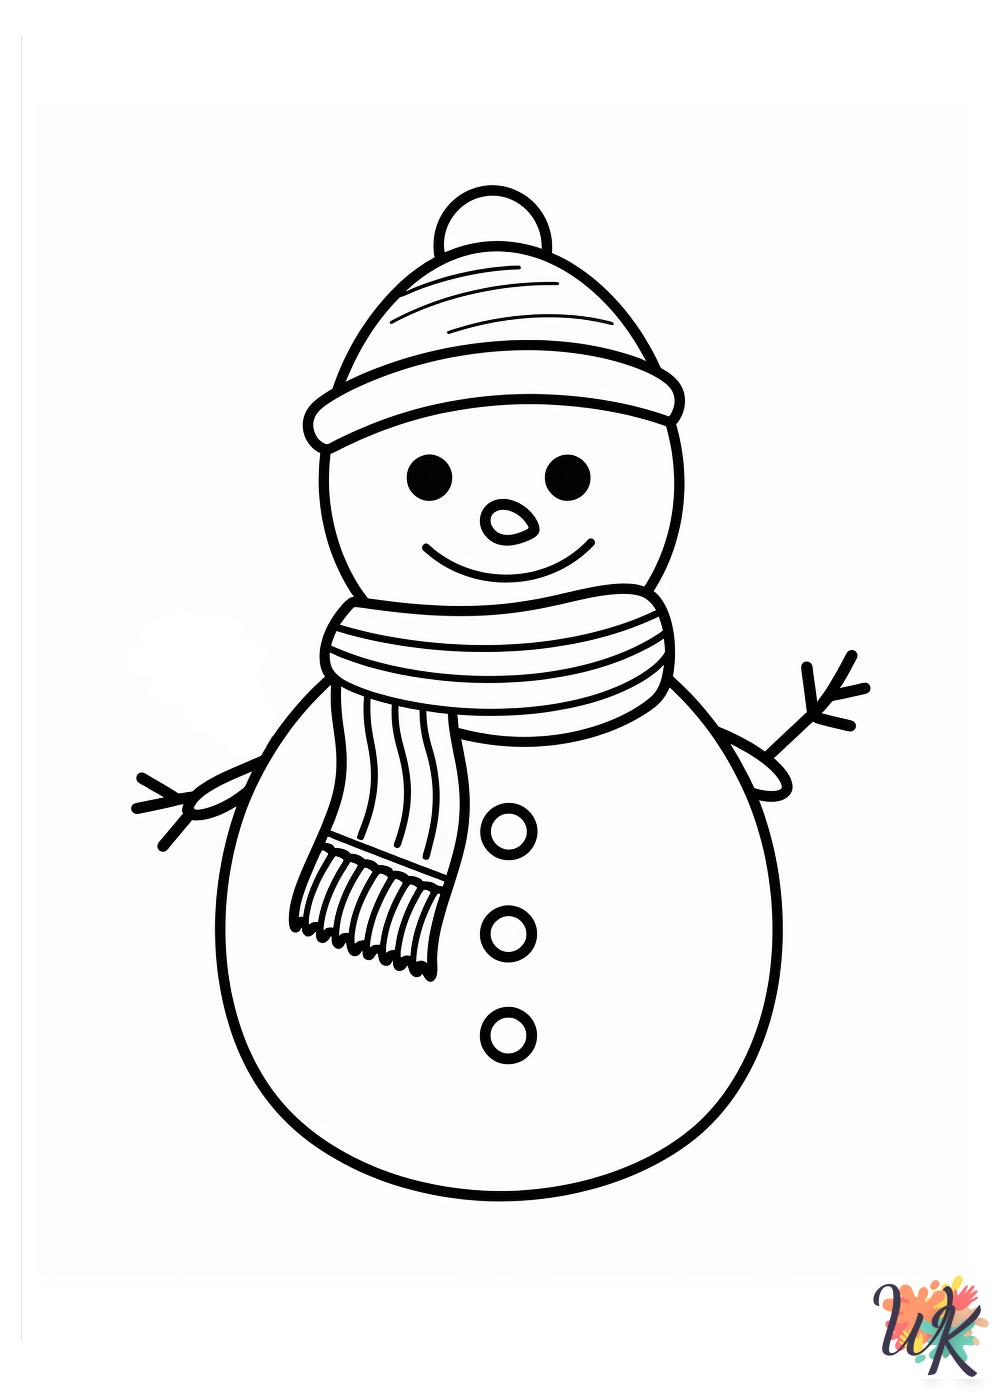 fun Snowman coloring pages